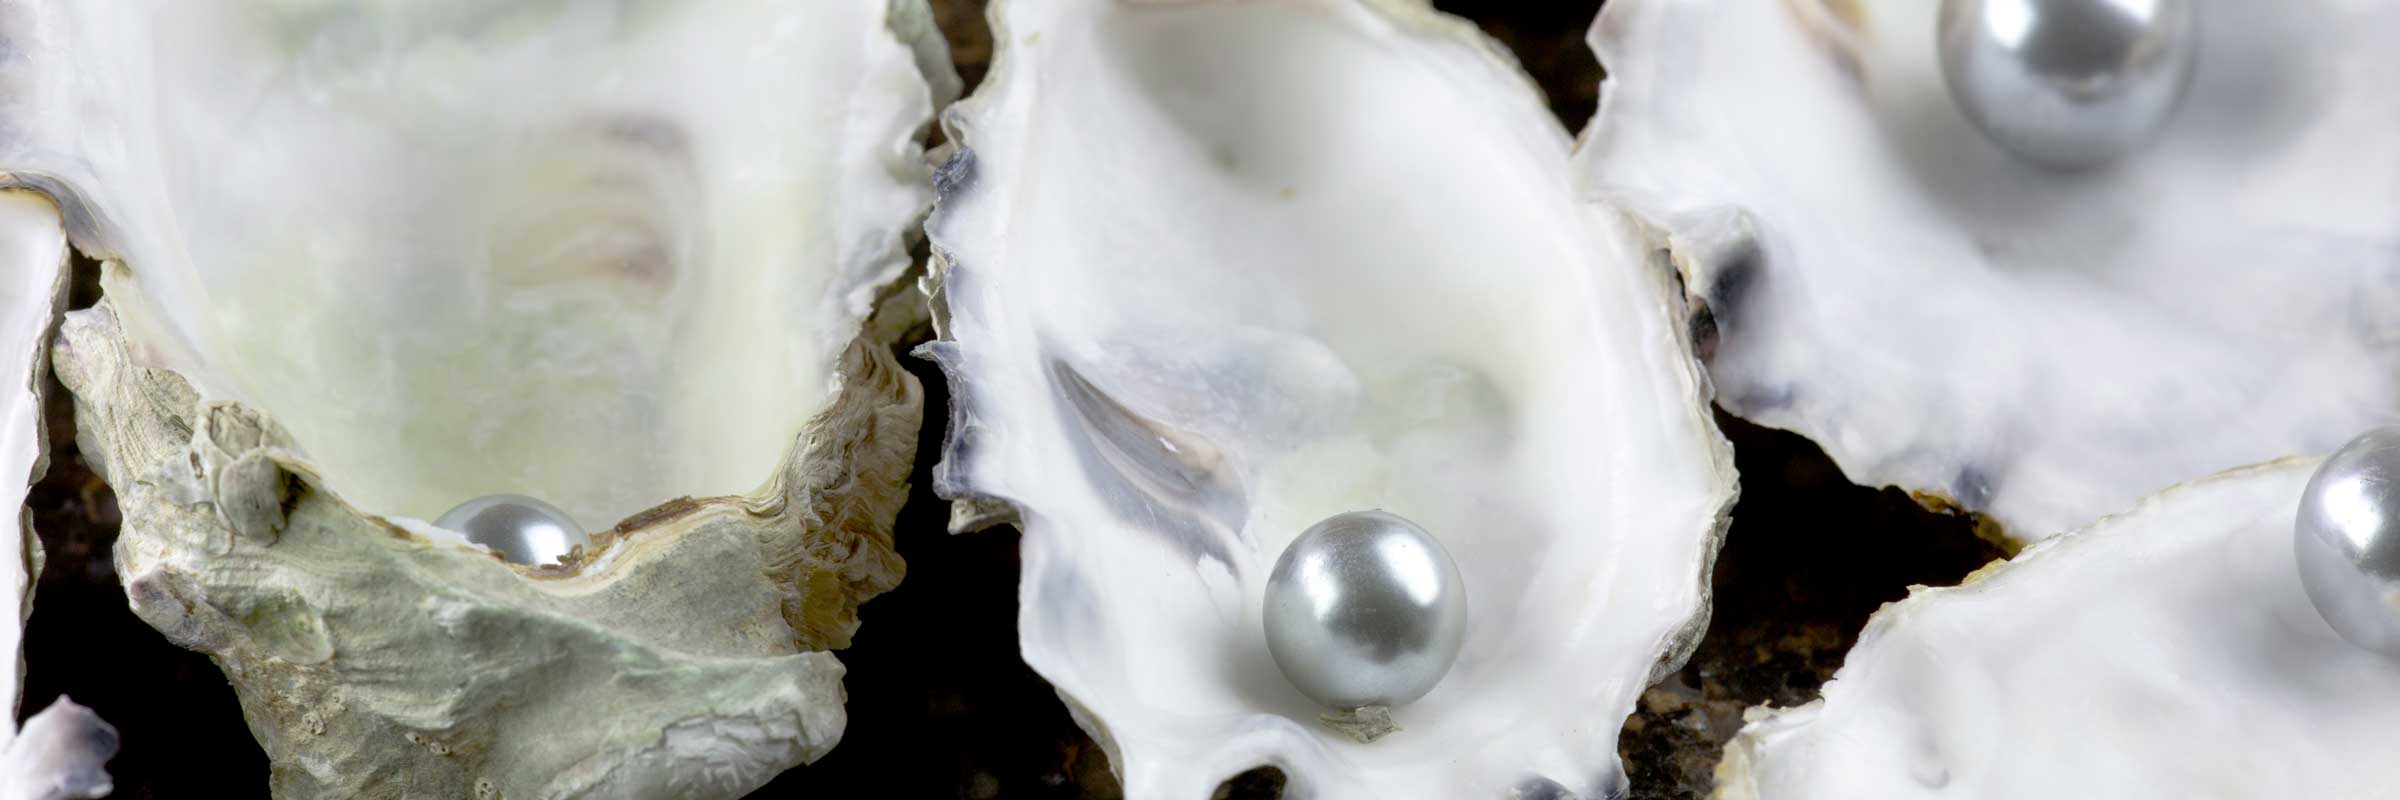 oyster-pearl-03